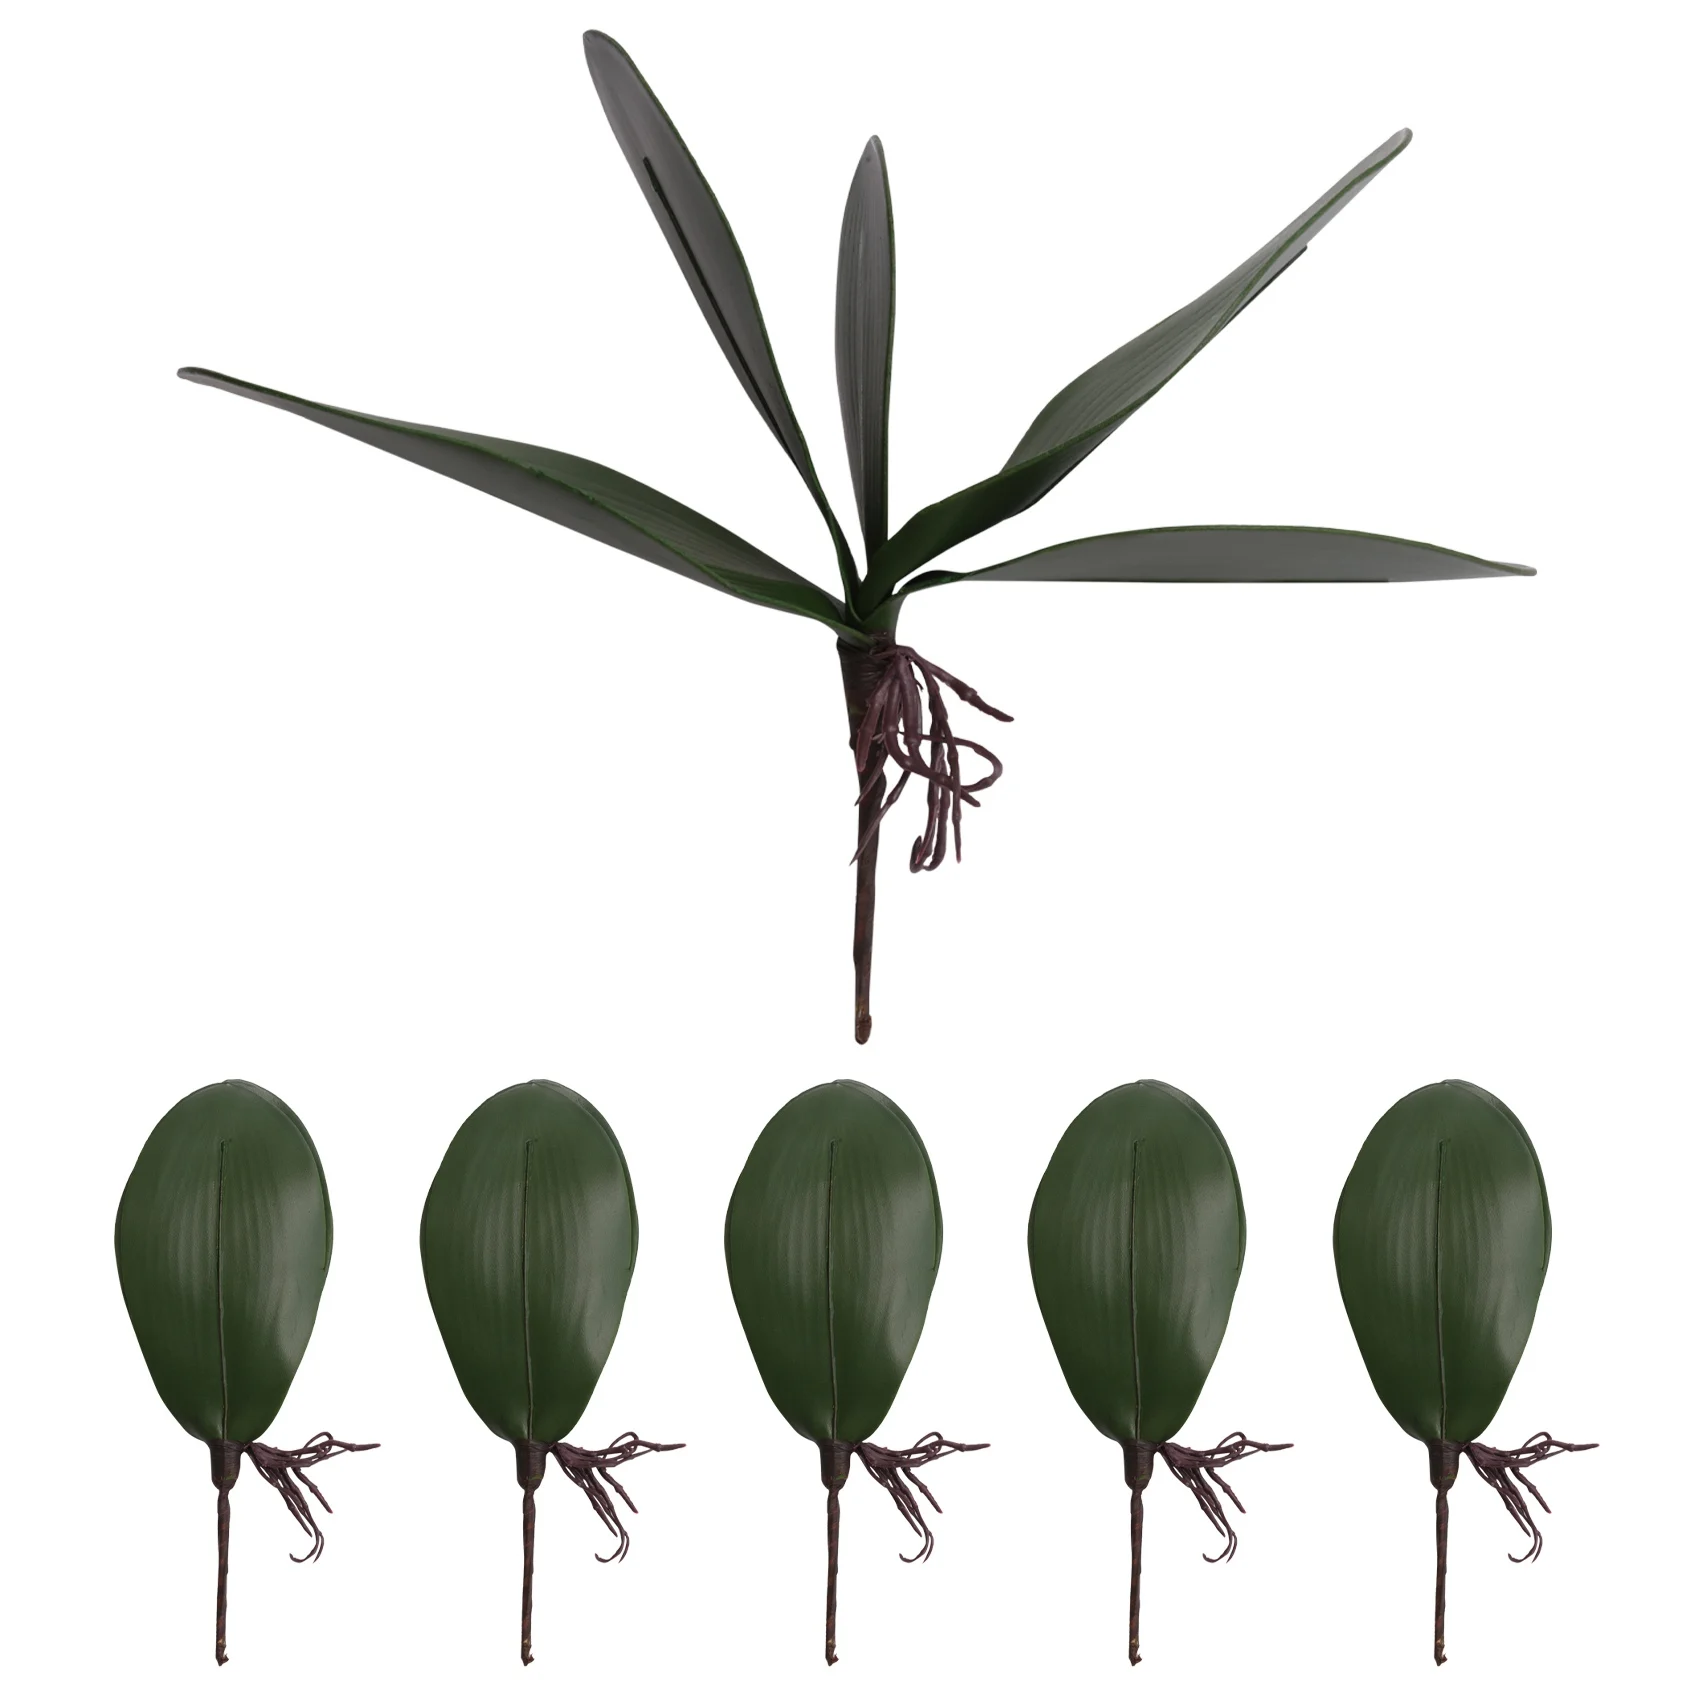 

Phalaenopsis Orchids Leaves Artificial Real Looking Roots Latex Contact Plants Green Faux Leaf Arrangement,6 PCS